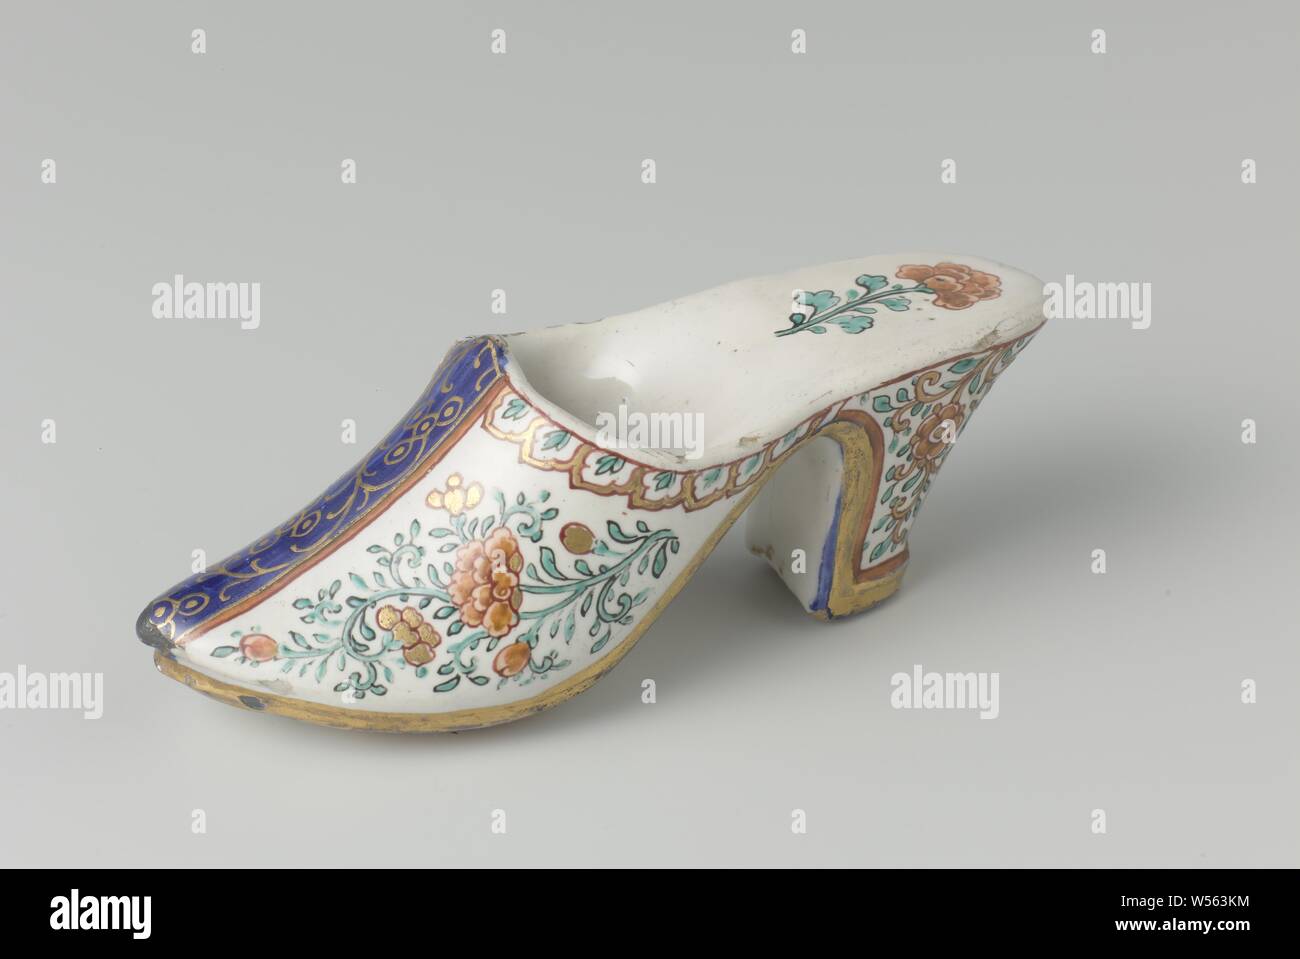 Pair of mules Muiltje, faience mule. Multicolored painted with floral  ornament, flowers, ornament, shoes, sandals, anonymous, Delft, c. 1710 - c.  1730, l 11 cm Stock Photo - Alamy